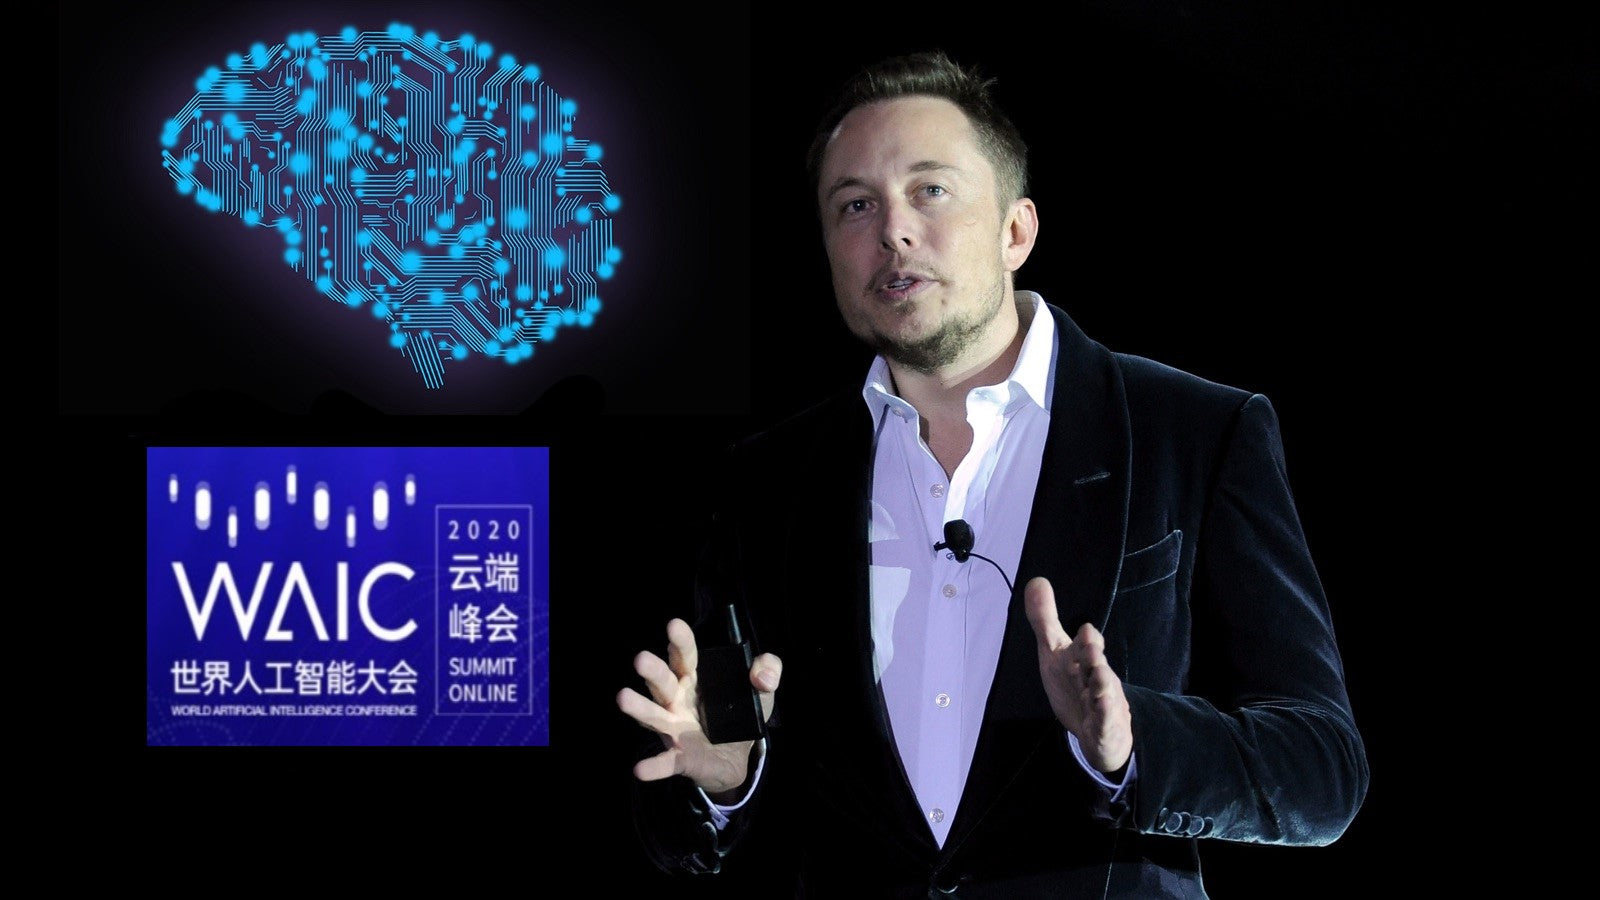 Tesla CEO Elon Musk Will Attend 2020 World AI Conference in Shanghai